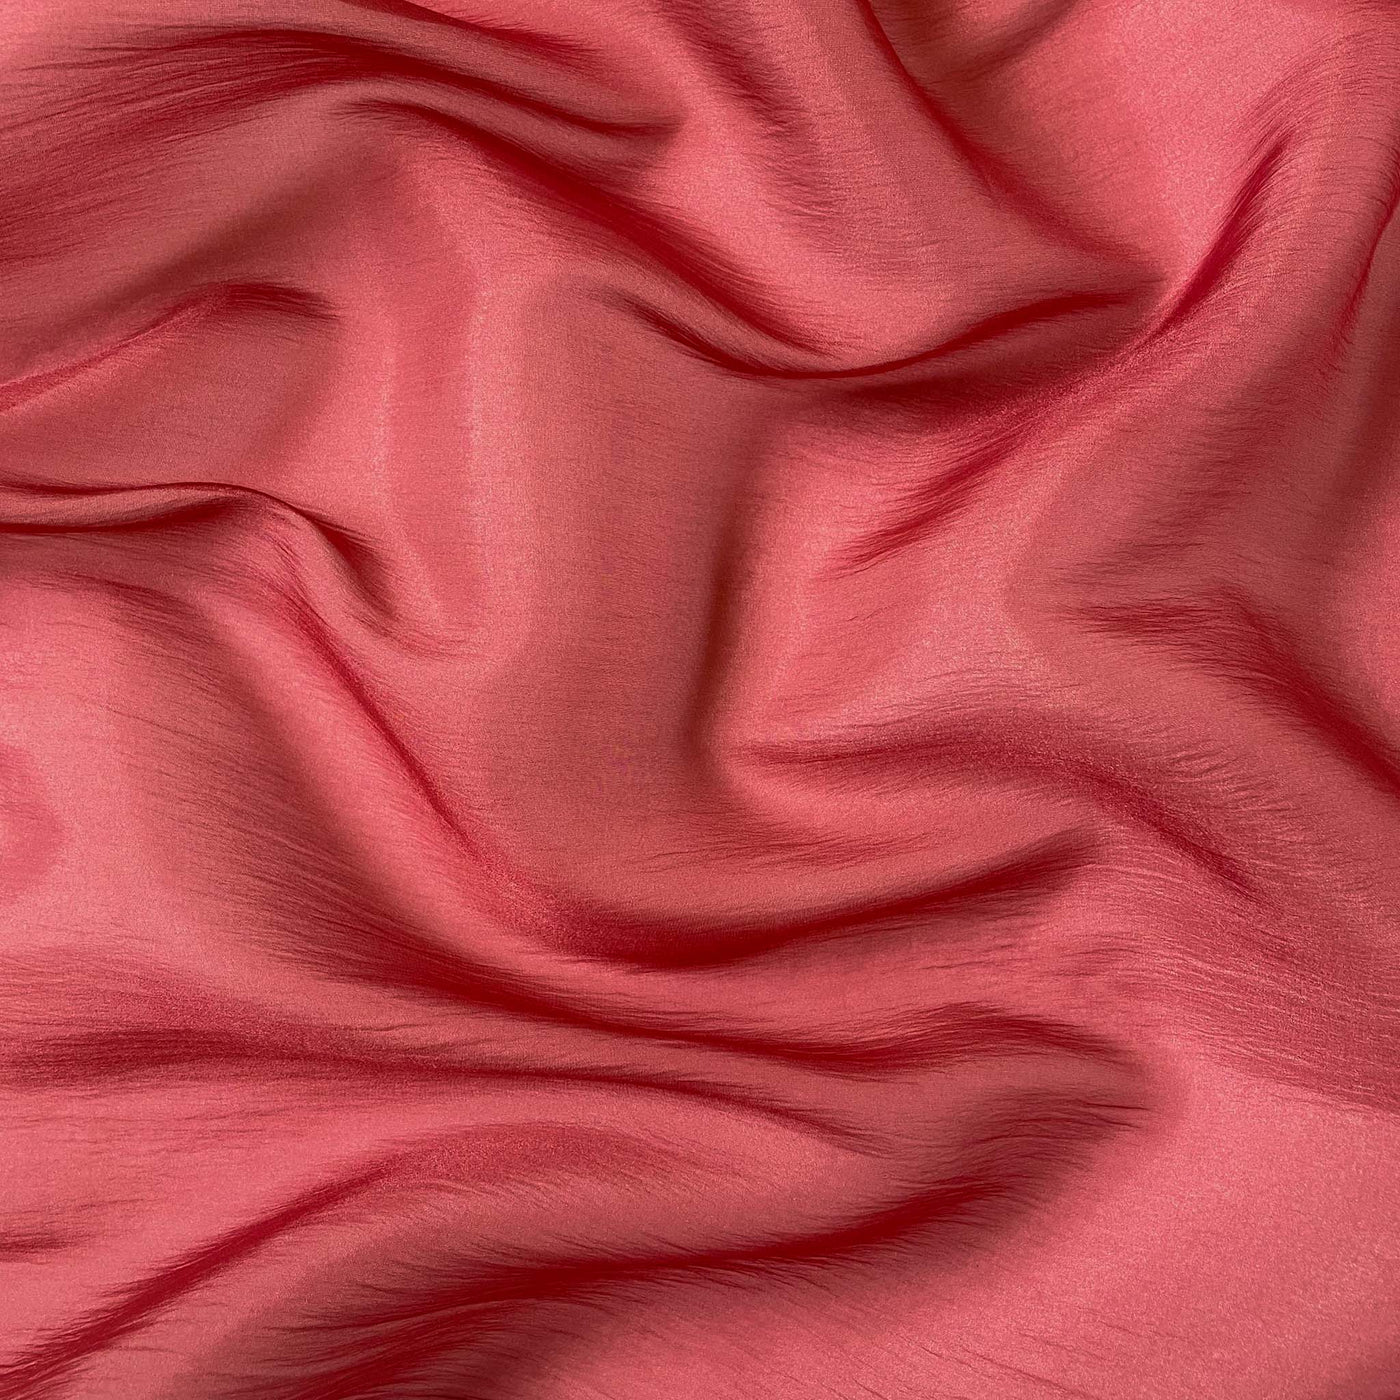 Fabric Pandit Fabric Dusty Red Plain Crinkle Organza Imported Fabric (Width 58 Inches)